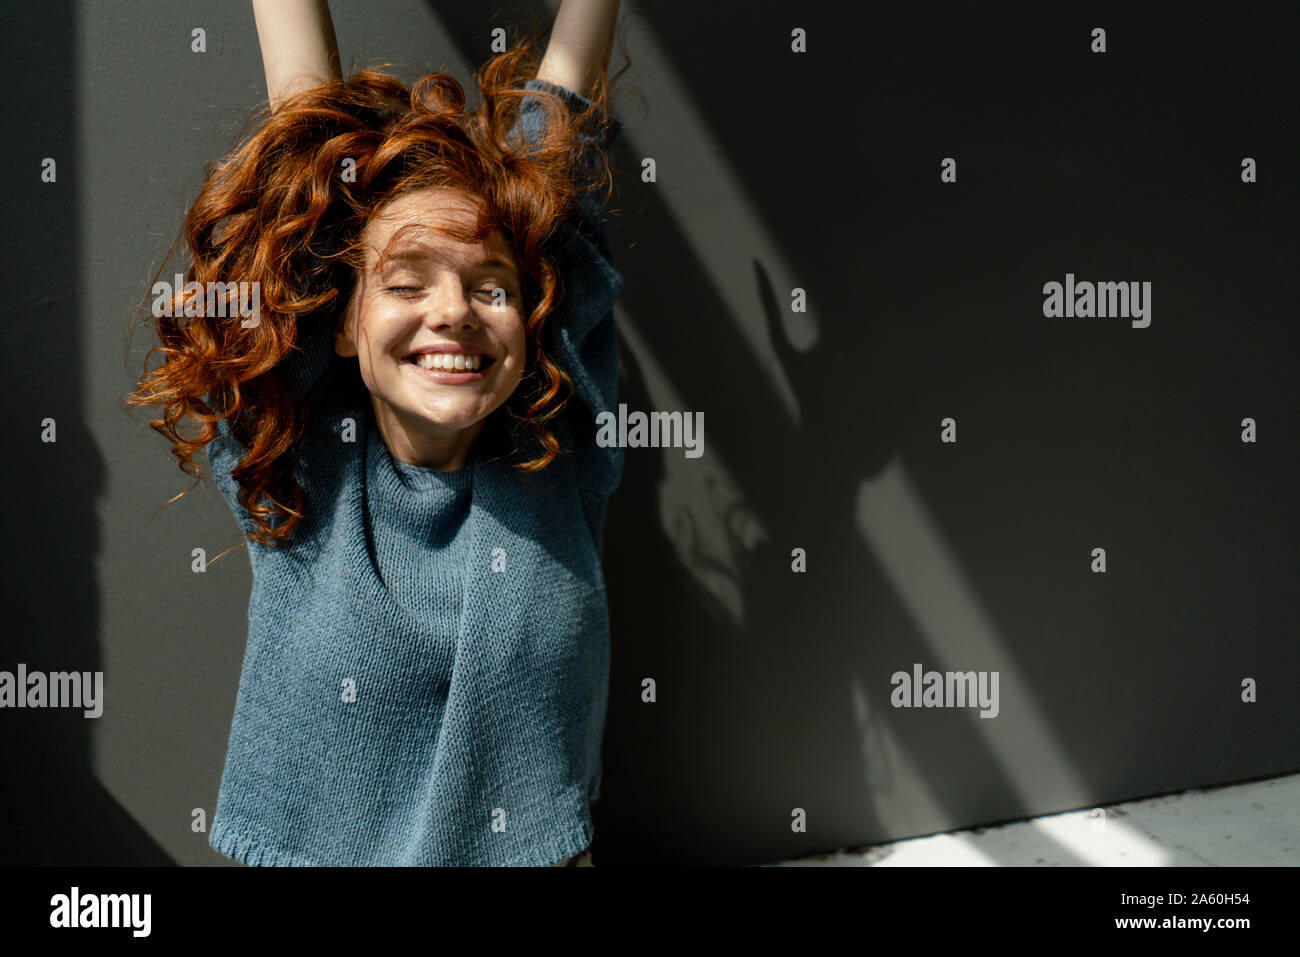 Portrait of happy redheaded woman with eyes closed raising hands Stock Photo